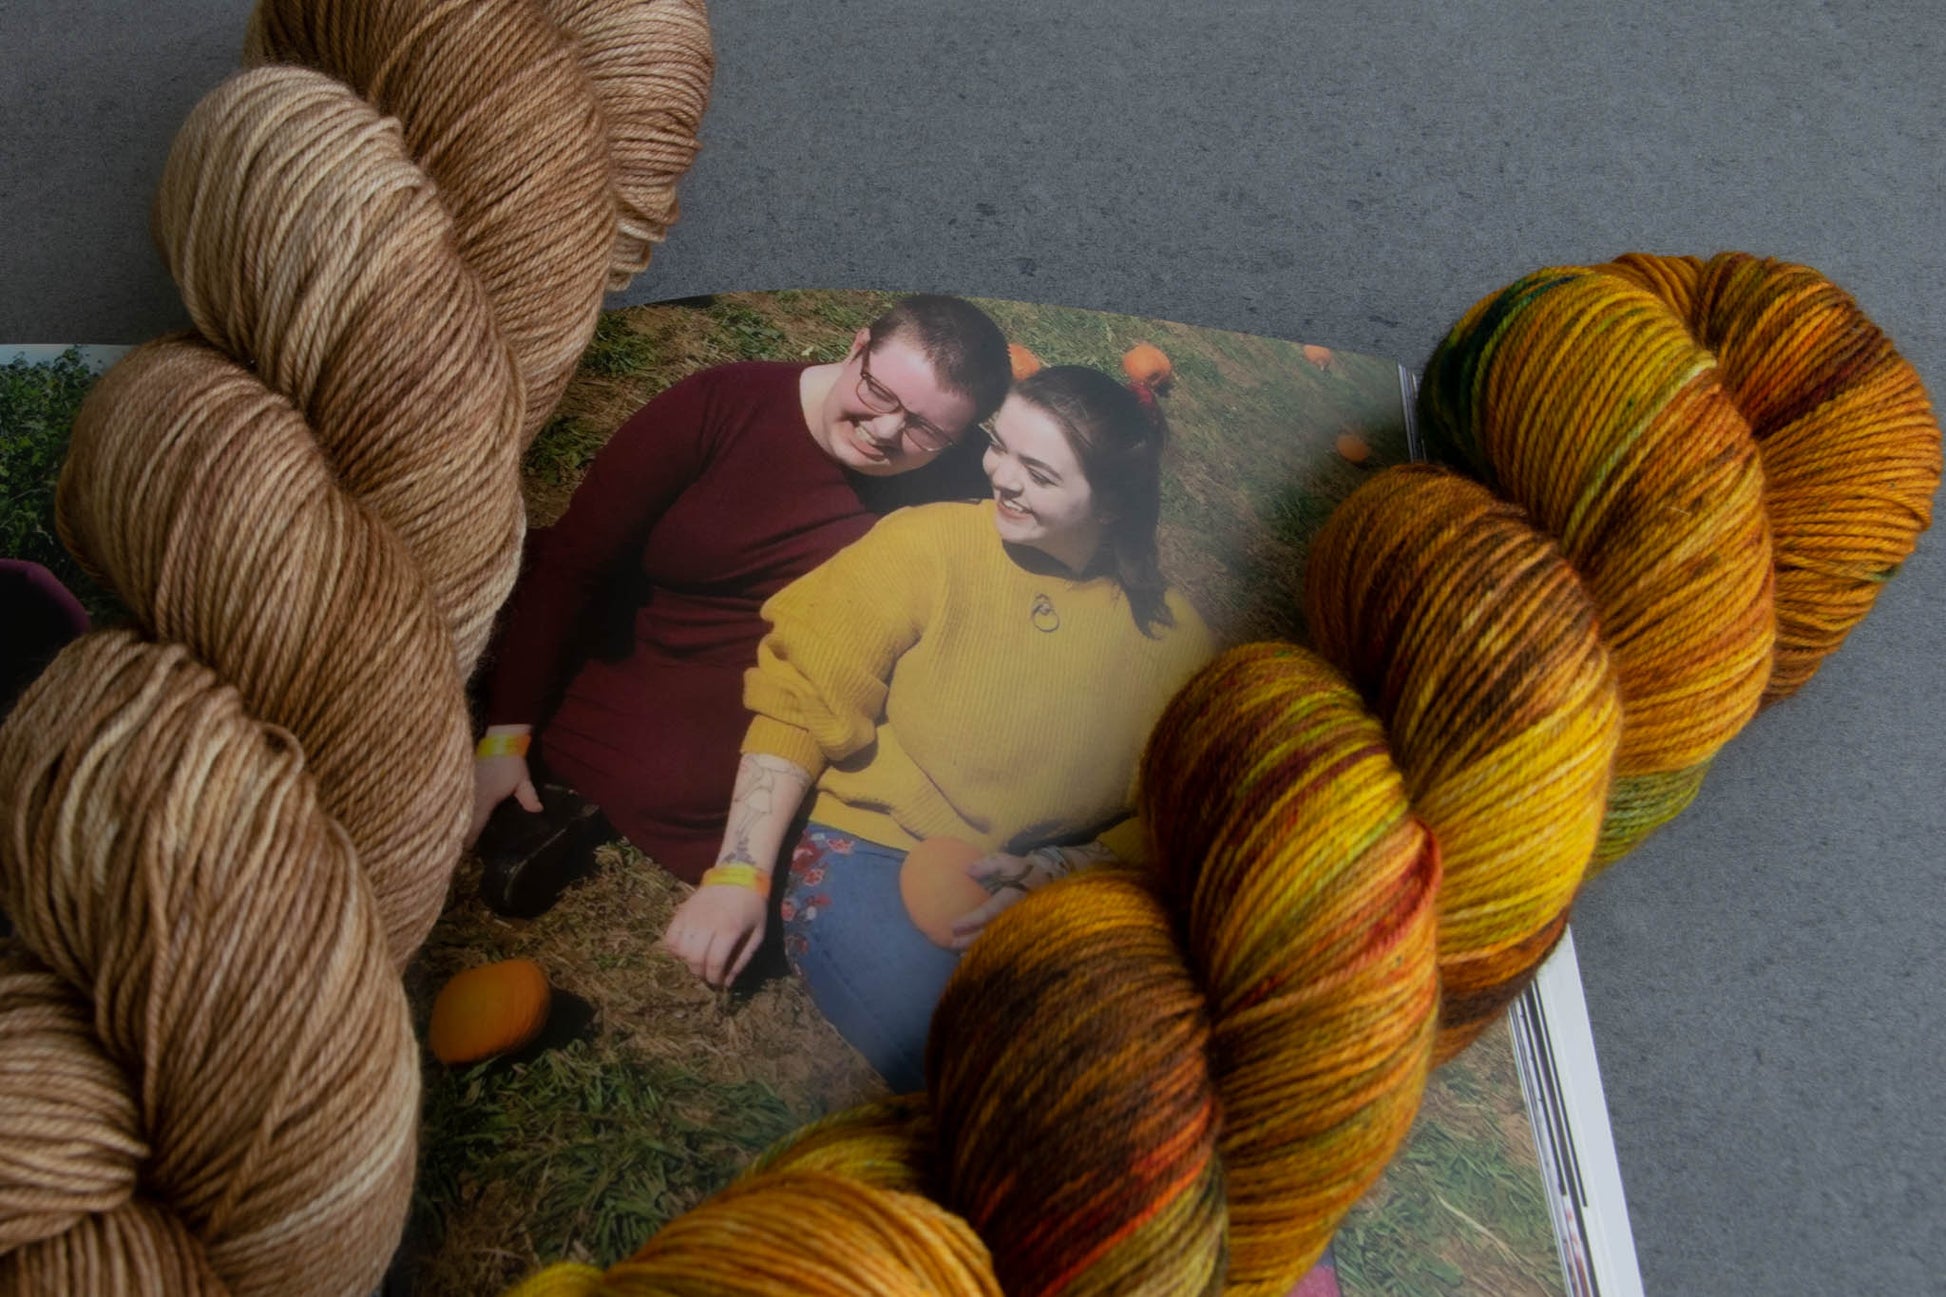 A skein of Jeter Farm with its companion brown, yellow, orange, and green variegated colorway and a photo from Cat and Penny's engagement.